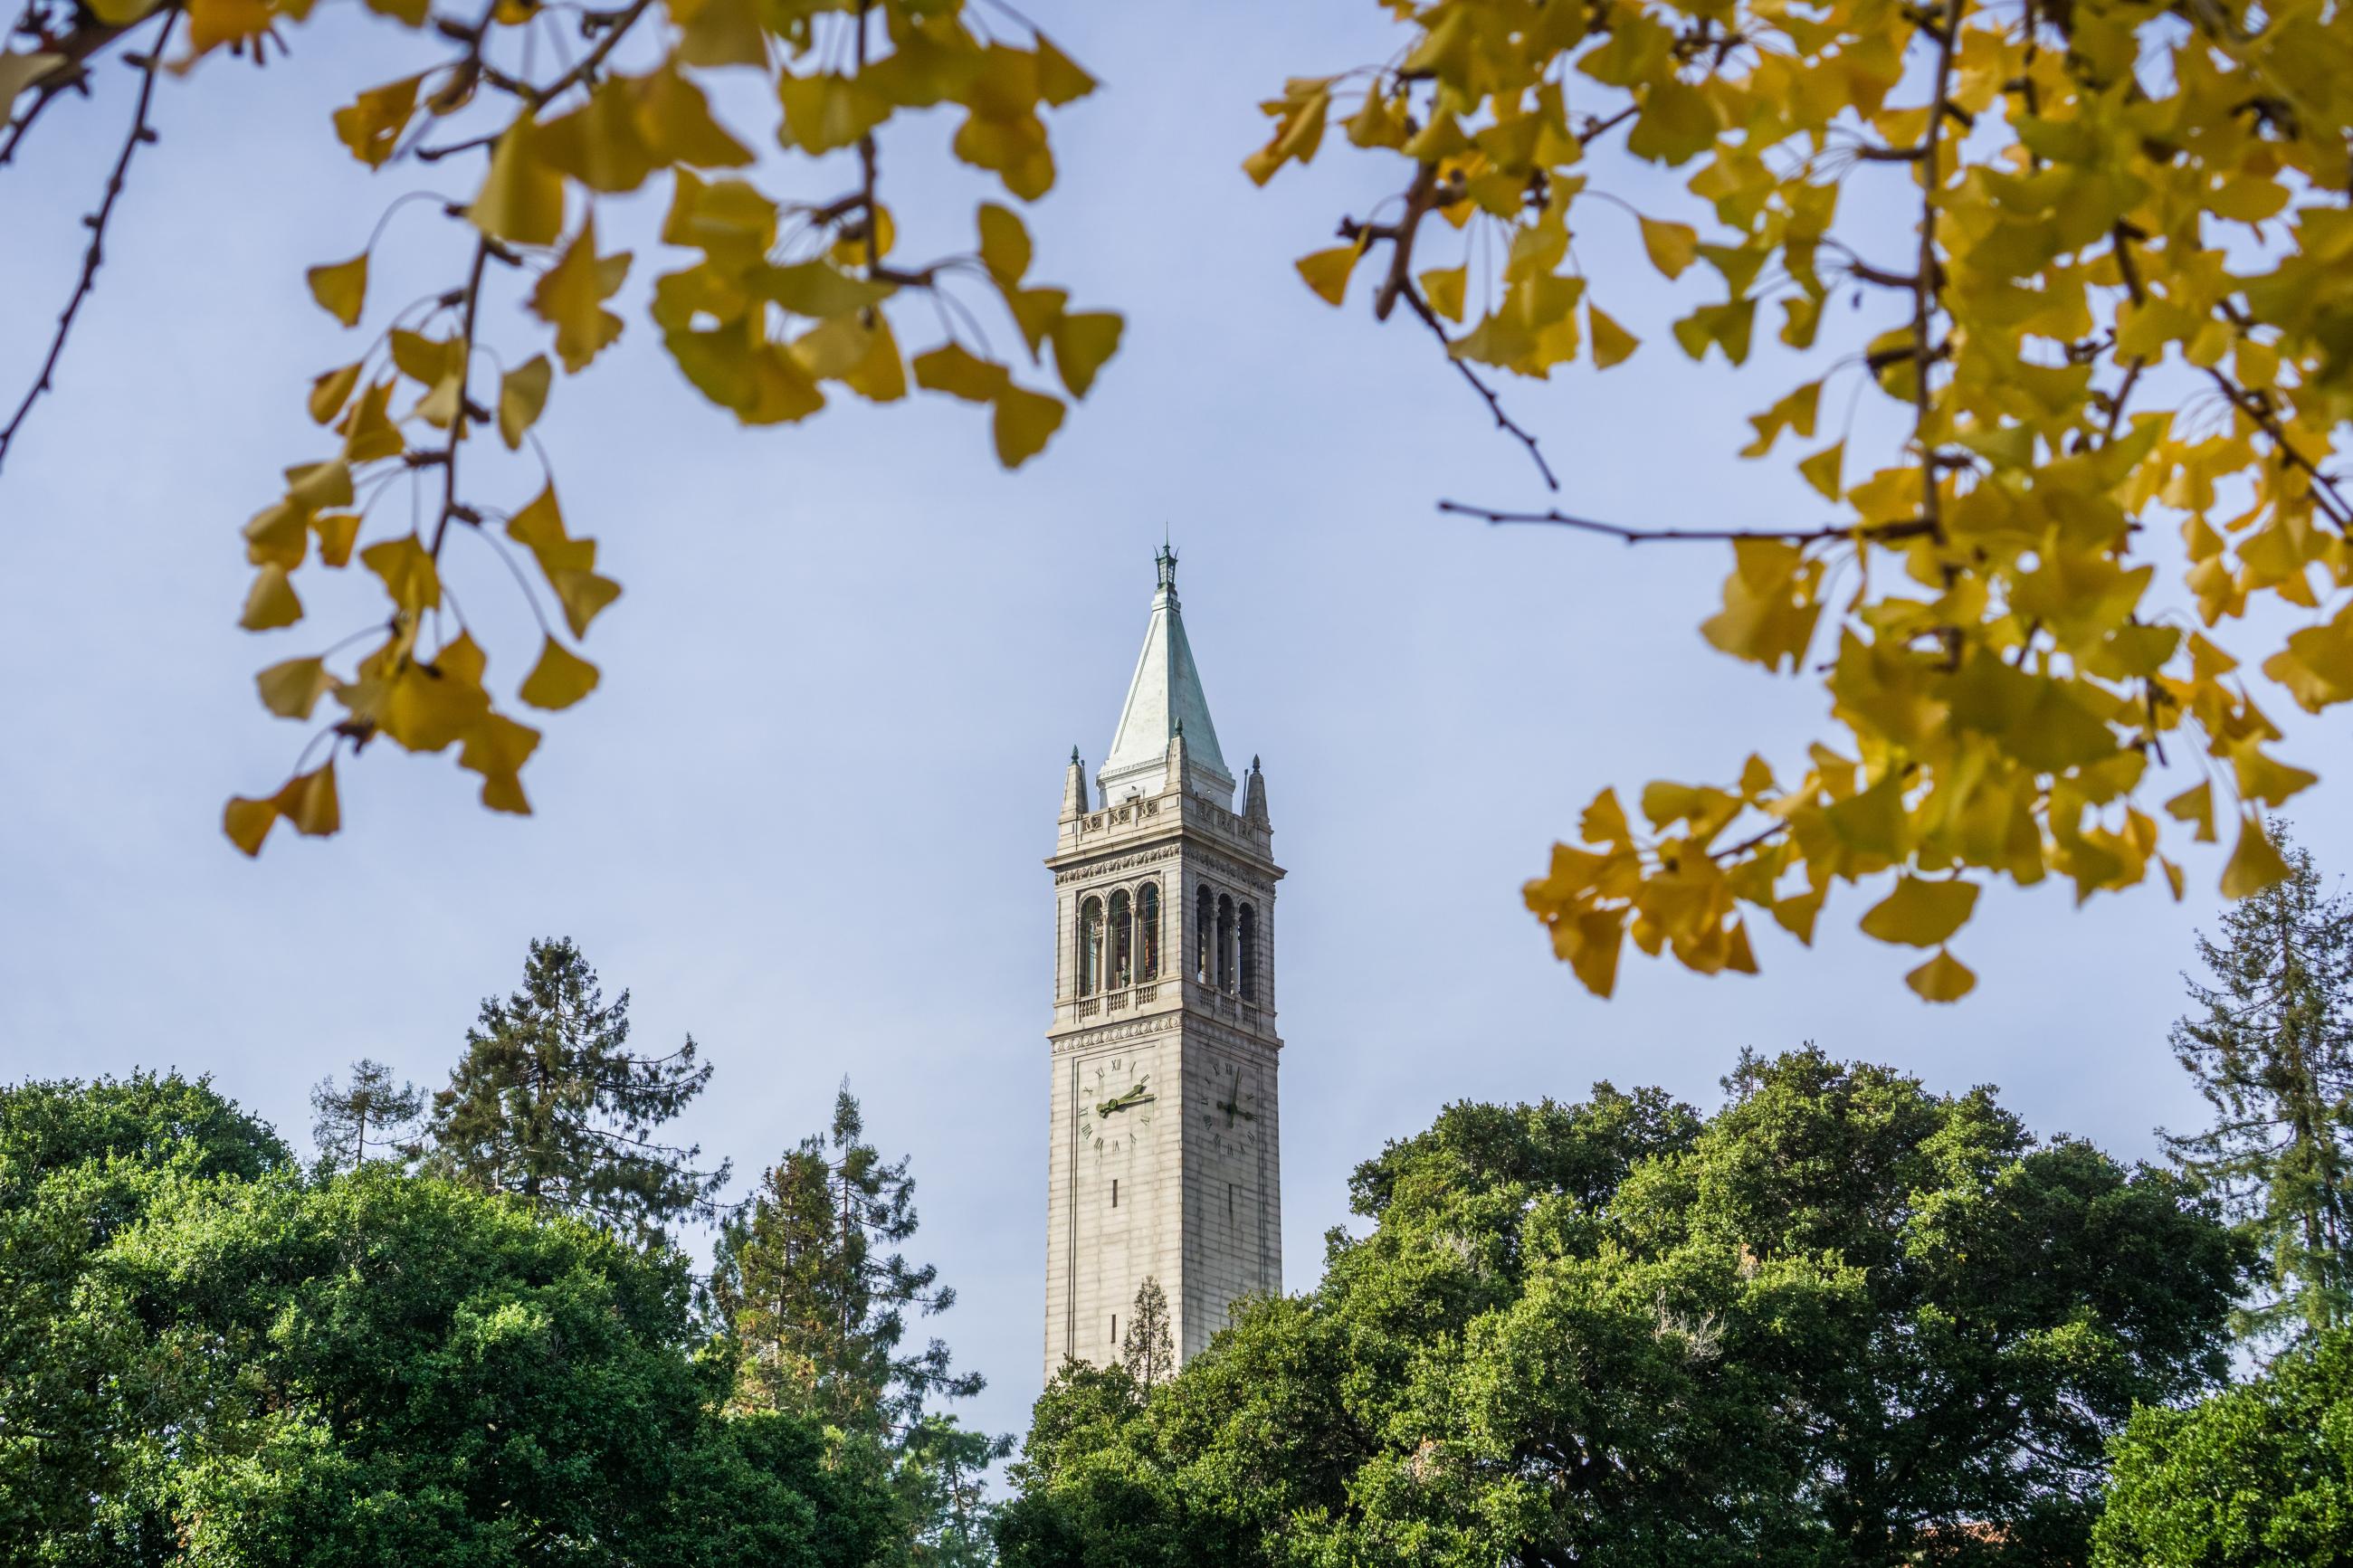 UC Berkeley's Campanile in the background with yellow ginkgo leaves in the foreground.  